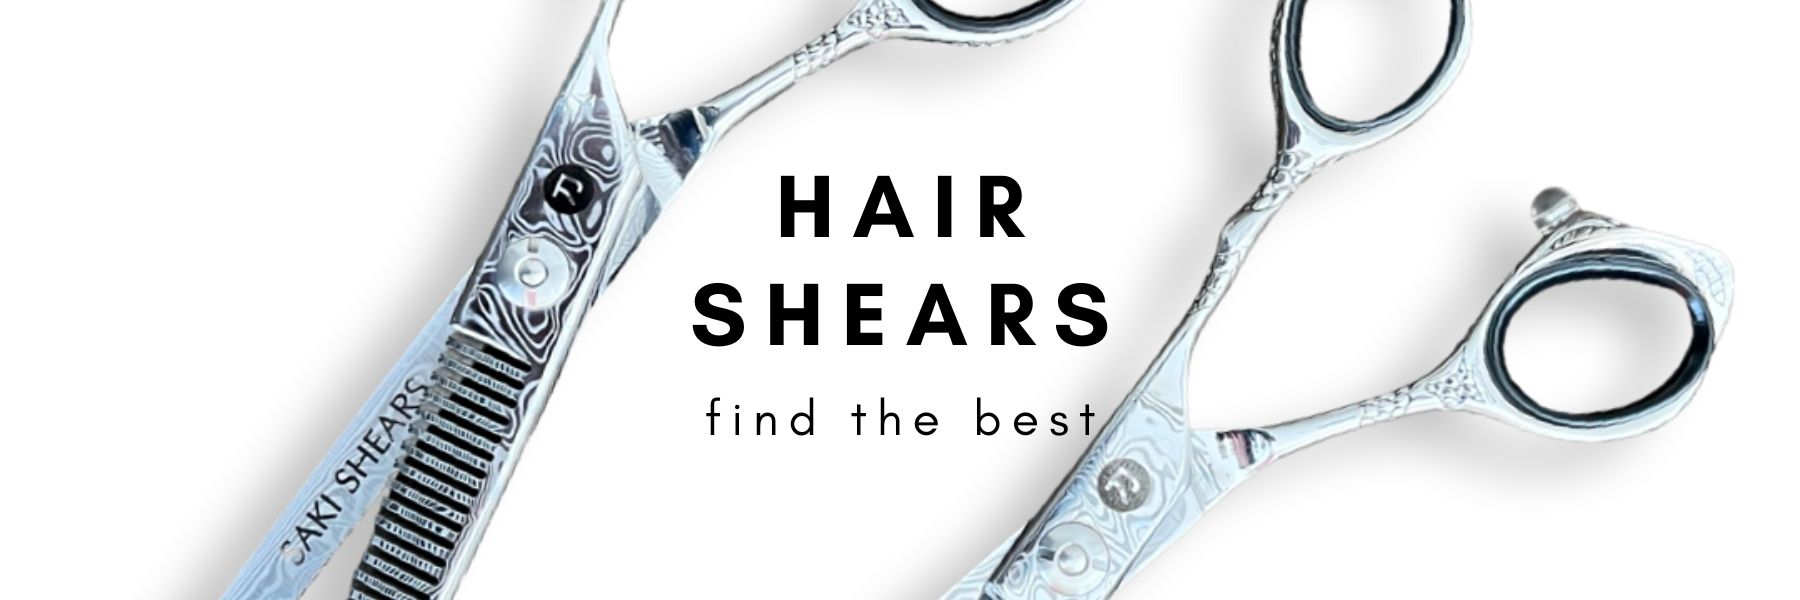 Expert Tips for Finding the Best Shears for Your Salon Needs